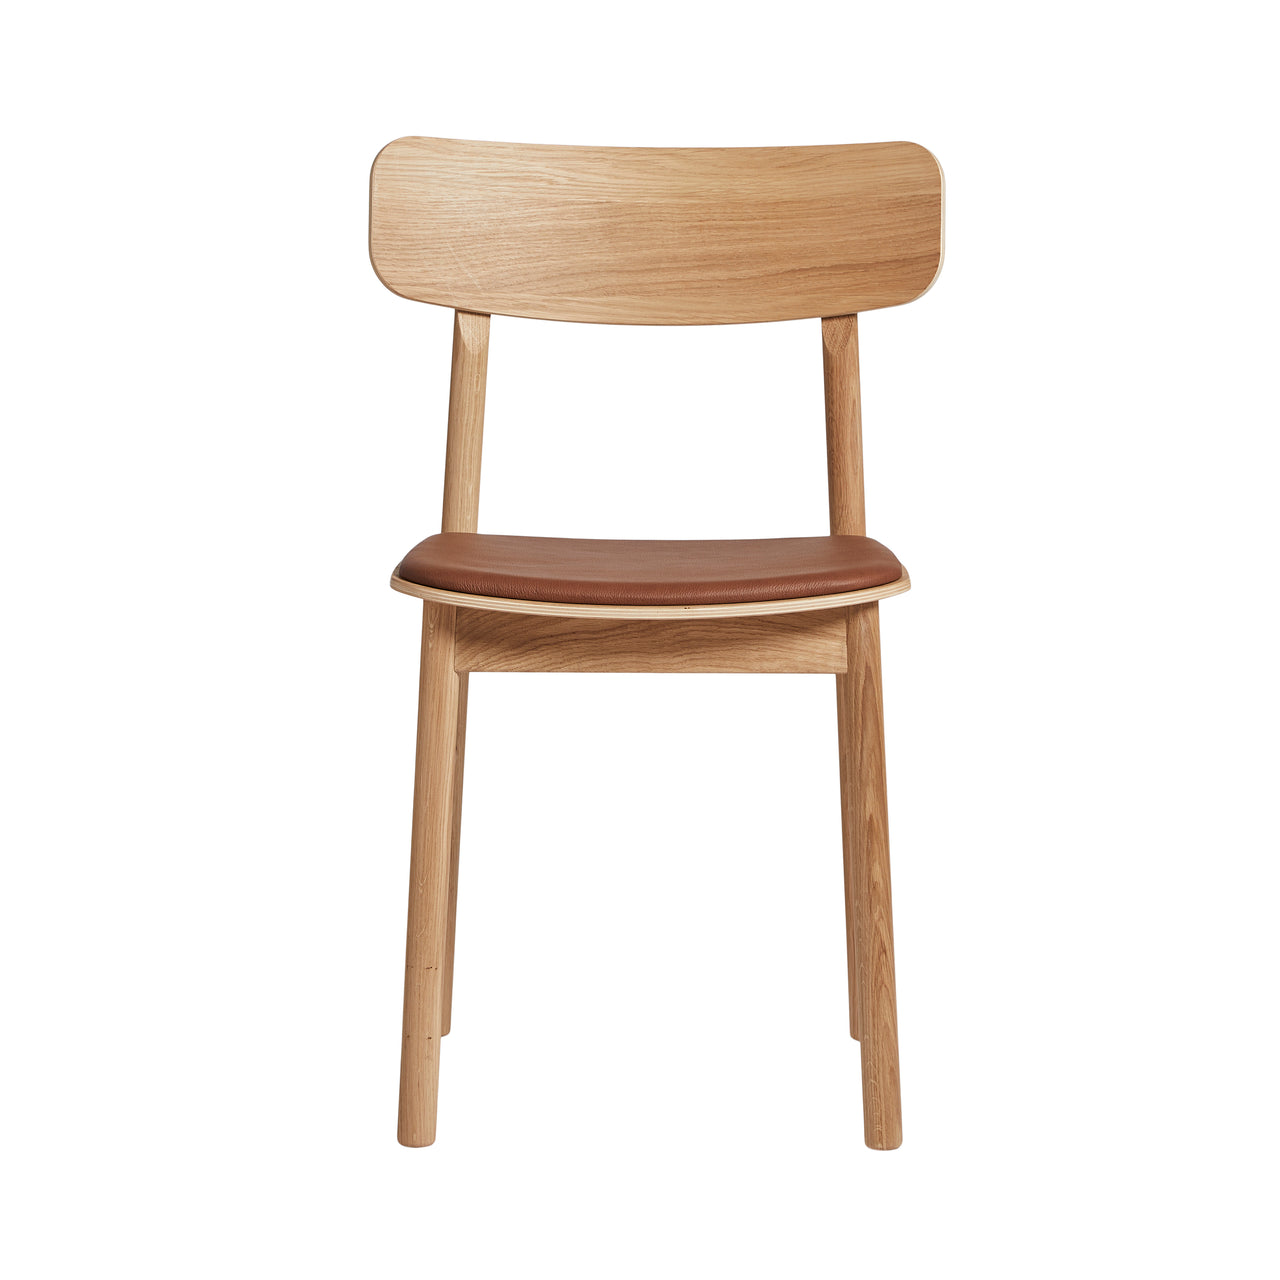 Soma Dining Chair: Oiled Oak + With Cognac Seatpad